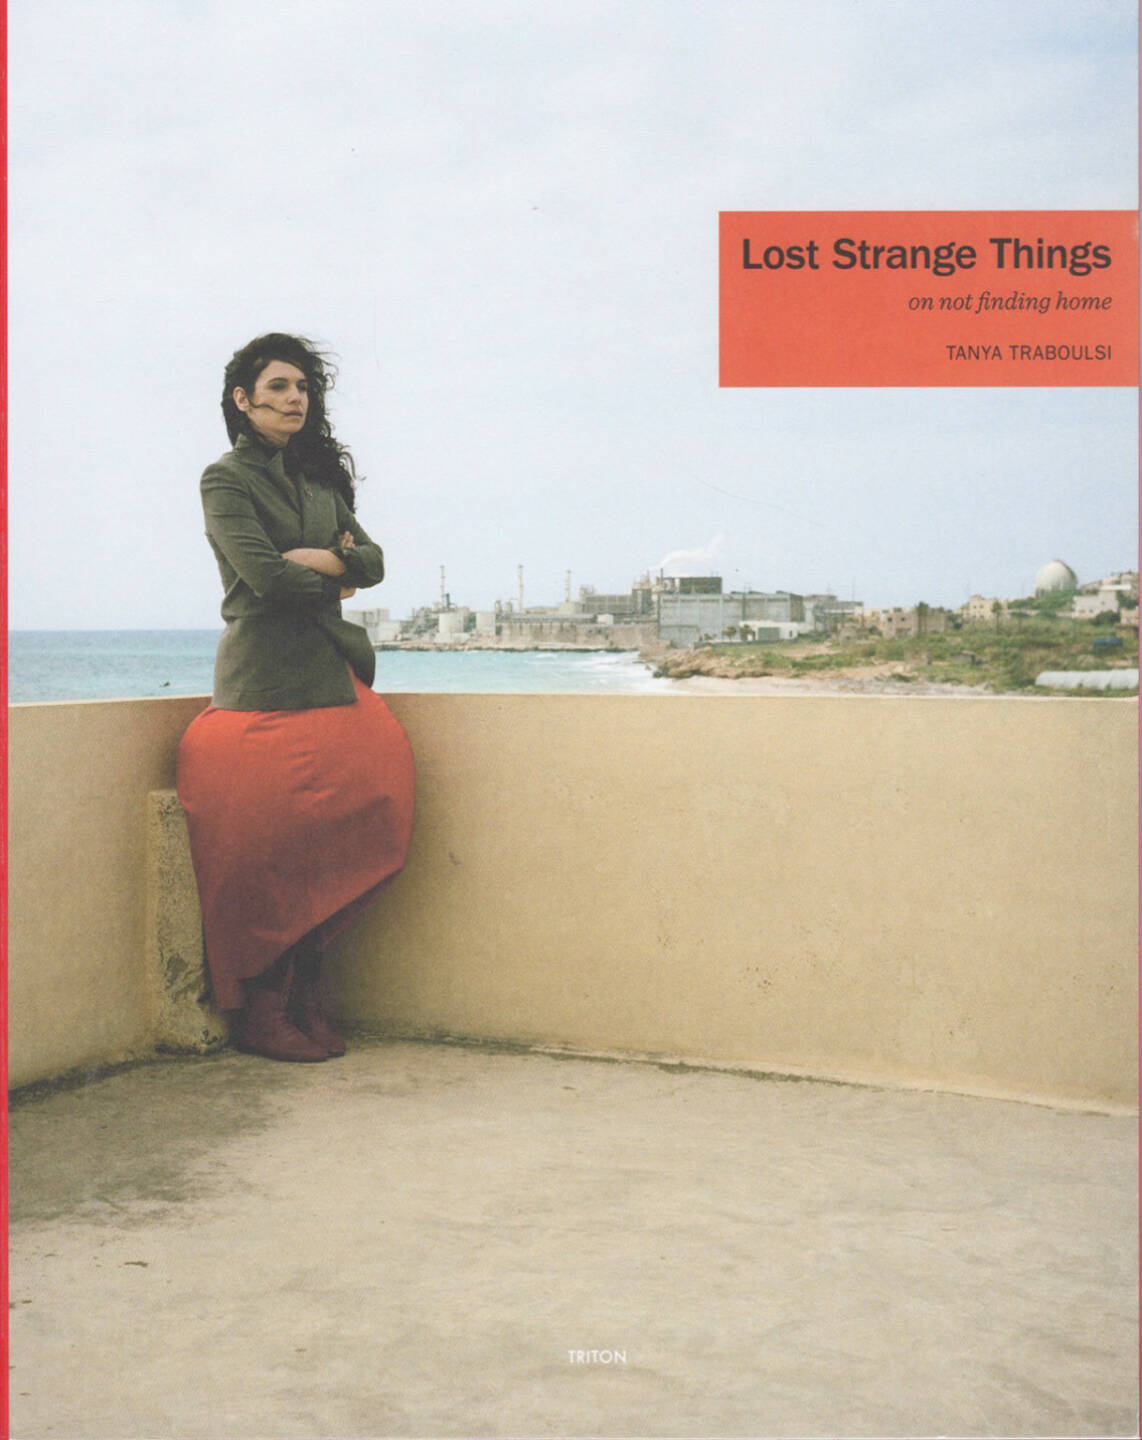 Tanya Traboulsi - Lost Strange Things: On not finding home, Triton 2014, Cover - http://josefchladek.com/book/tanya_traboulsi_-_lost_strange_things_on_not_finding_home